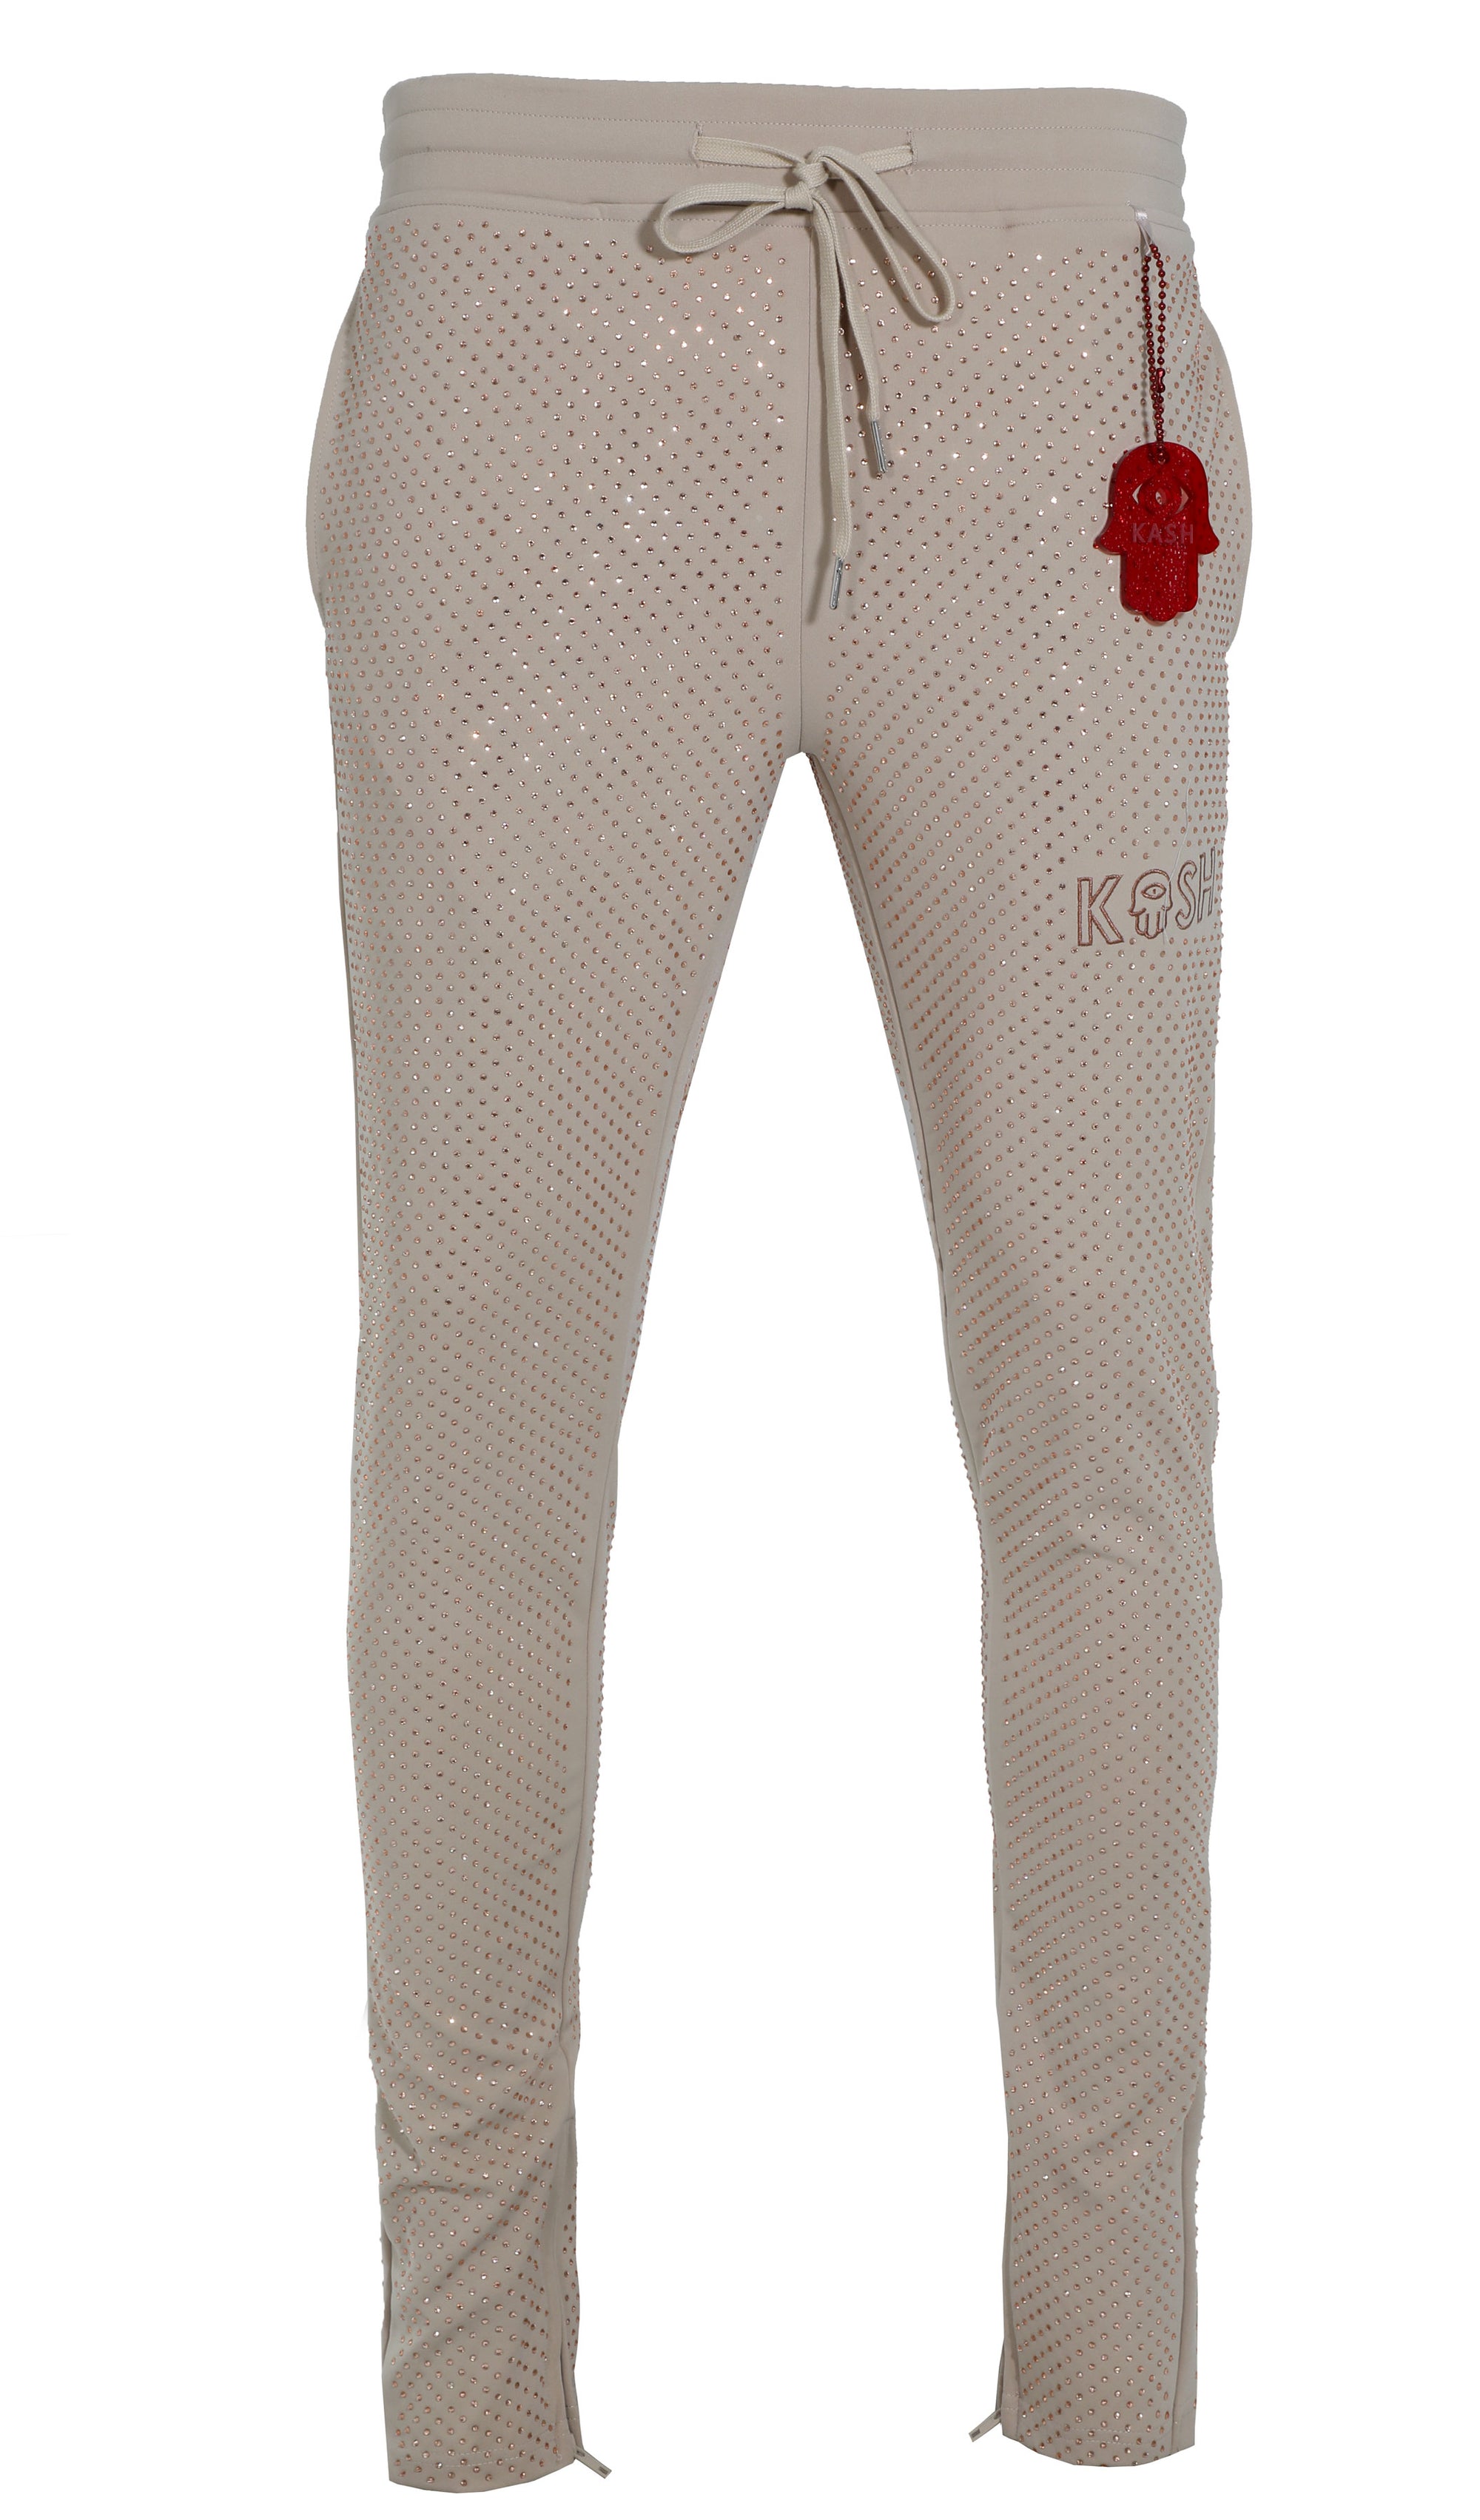 Kash All Over Diamond Track Pants Elastic Waistband Drawstring closure Color: Beige 100% Polyester Wrinkle Free Material Fits true to size